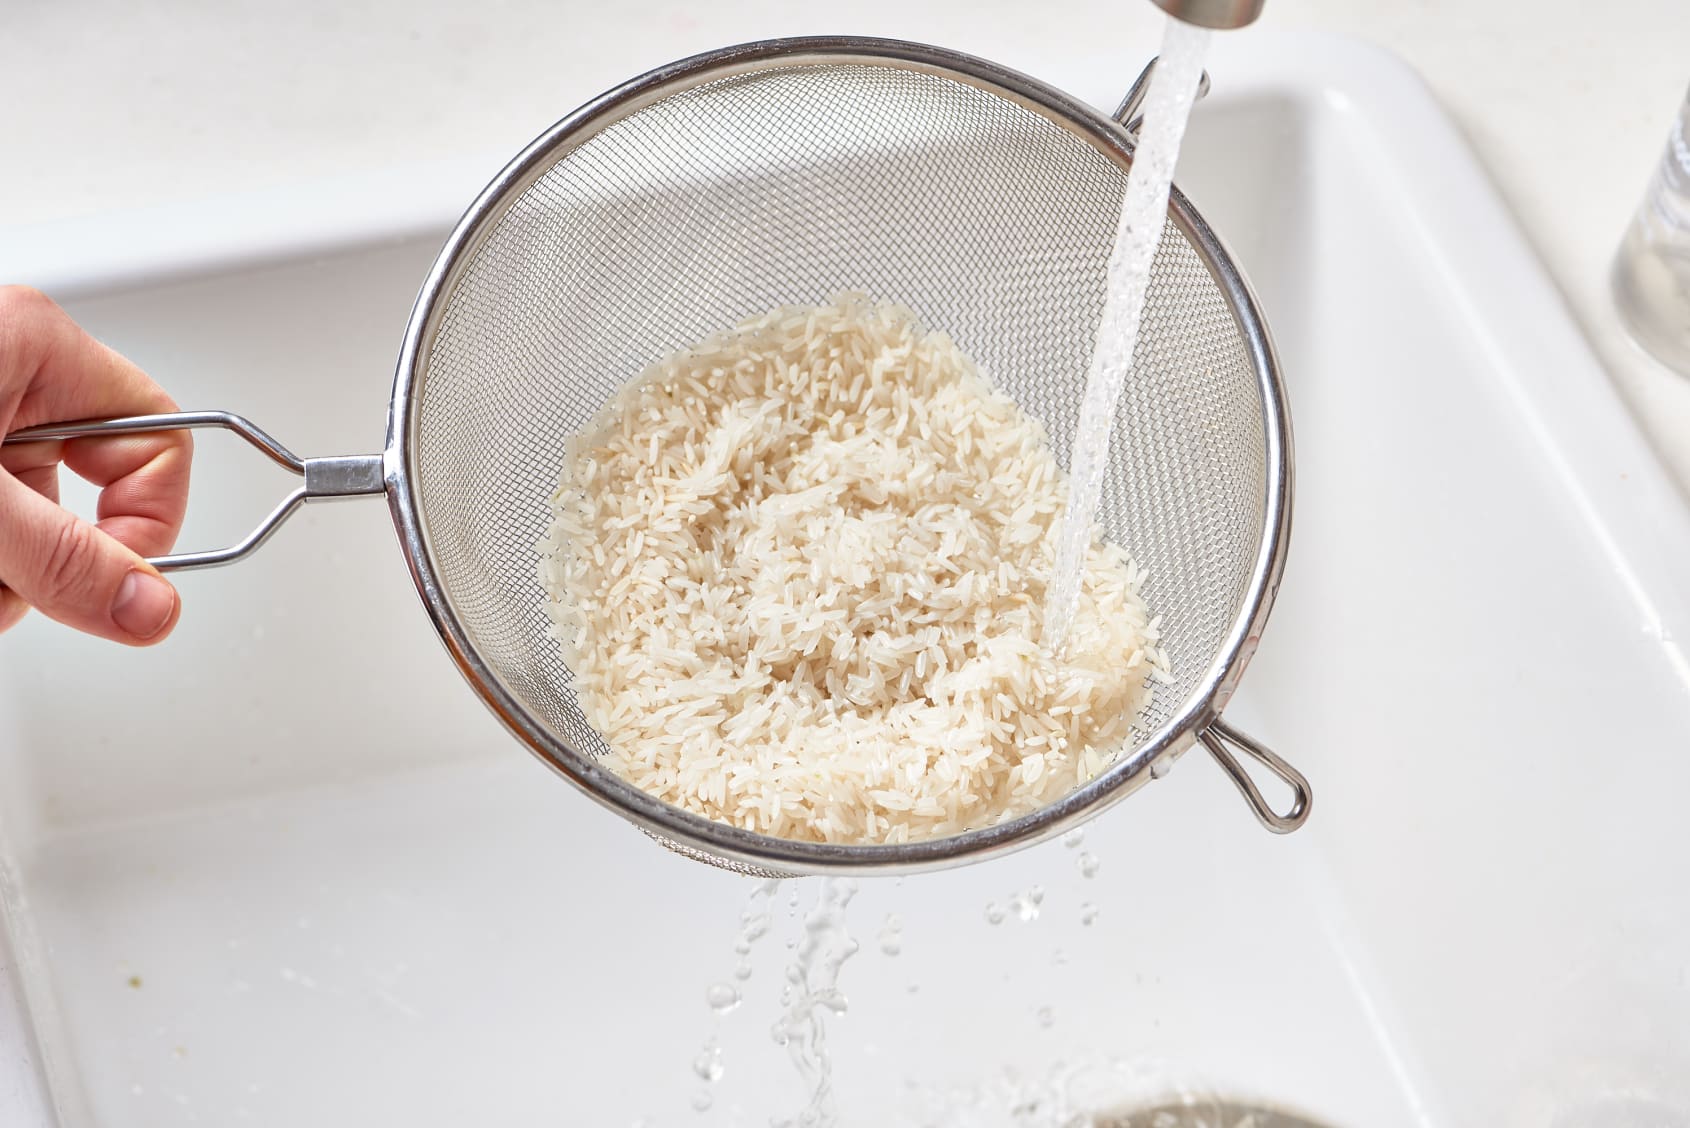 How To Cook Rice On the Stove (White, Brown or Basmati) | The Kitchn